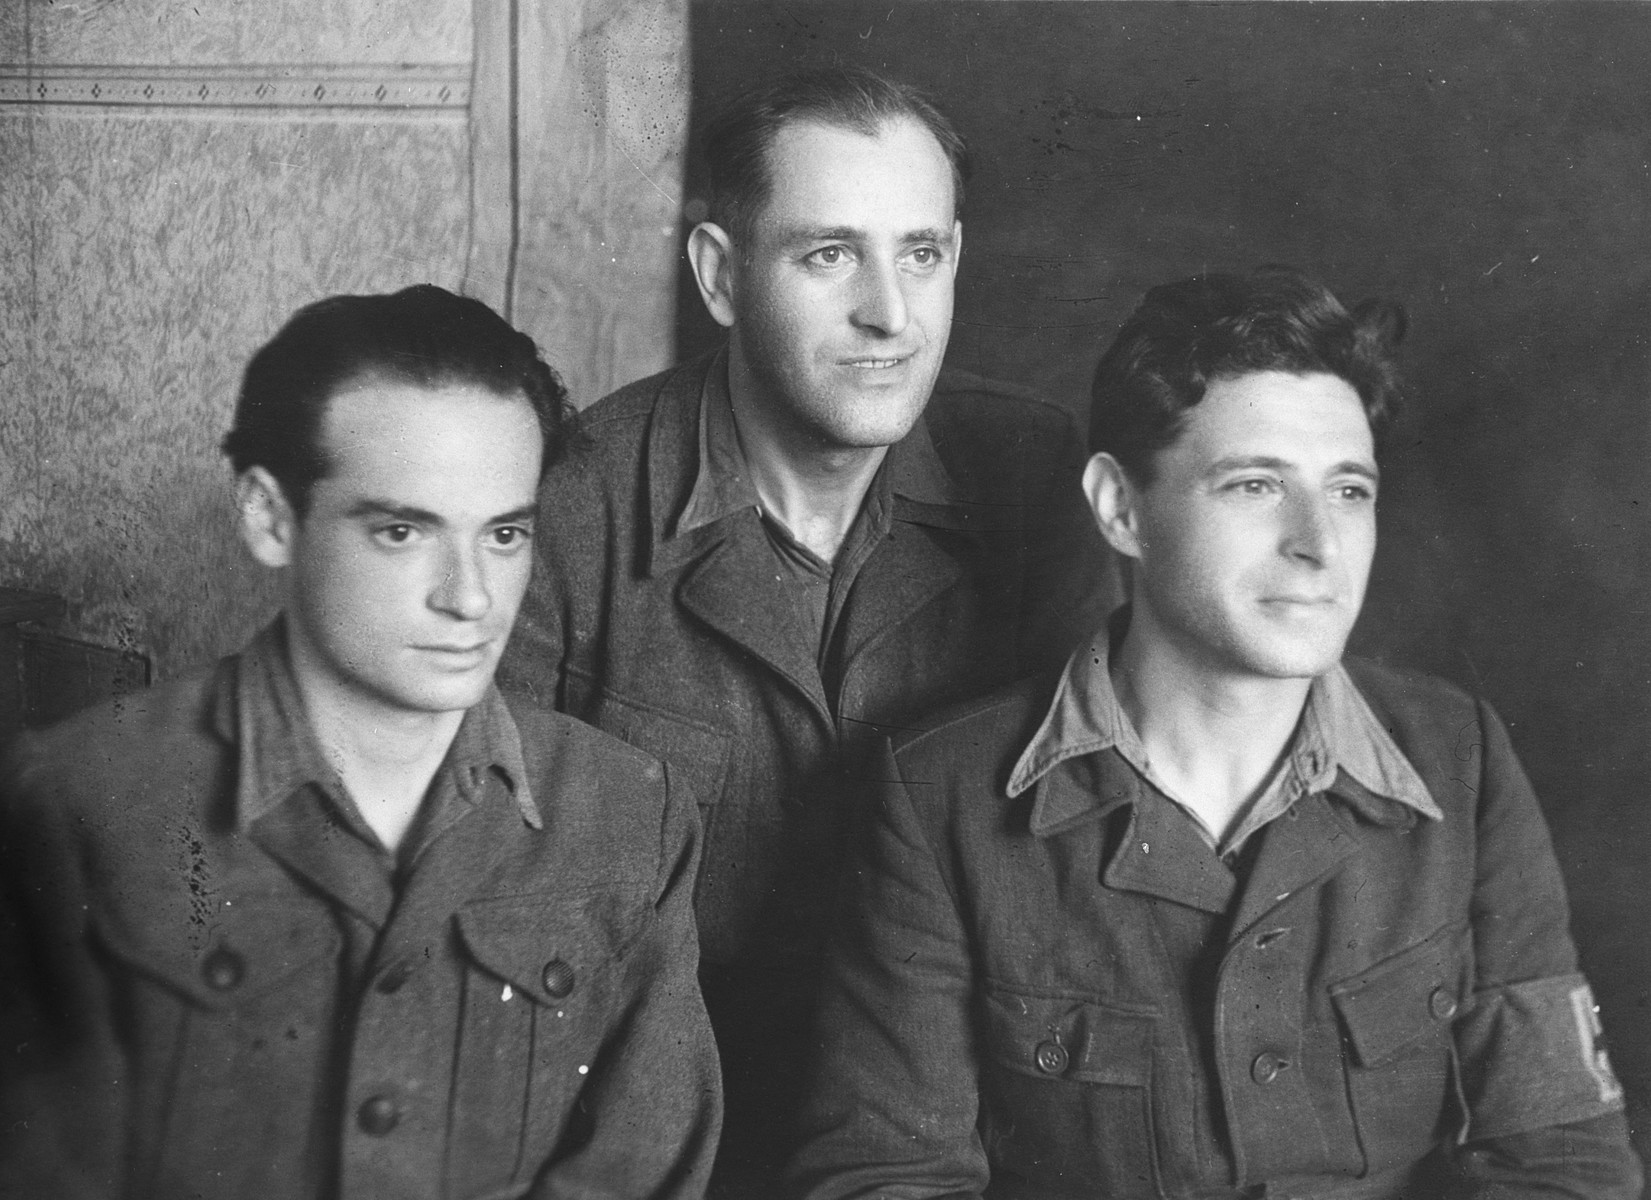 Portrait of three Hungarian-Jews captured while in a forced labor brigade and sent to a Soviet Prisoner of War camp in Gorky.

Denes Simonyi is pictured on the left.  In the center is Jozsef Kupfer, and on the right is Marton Klein.